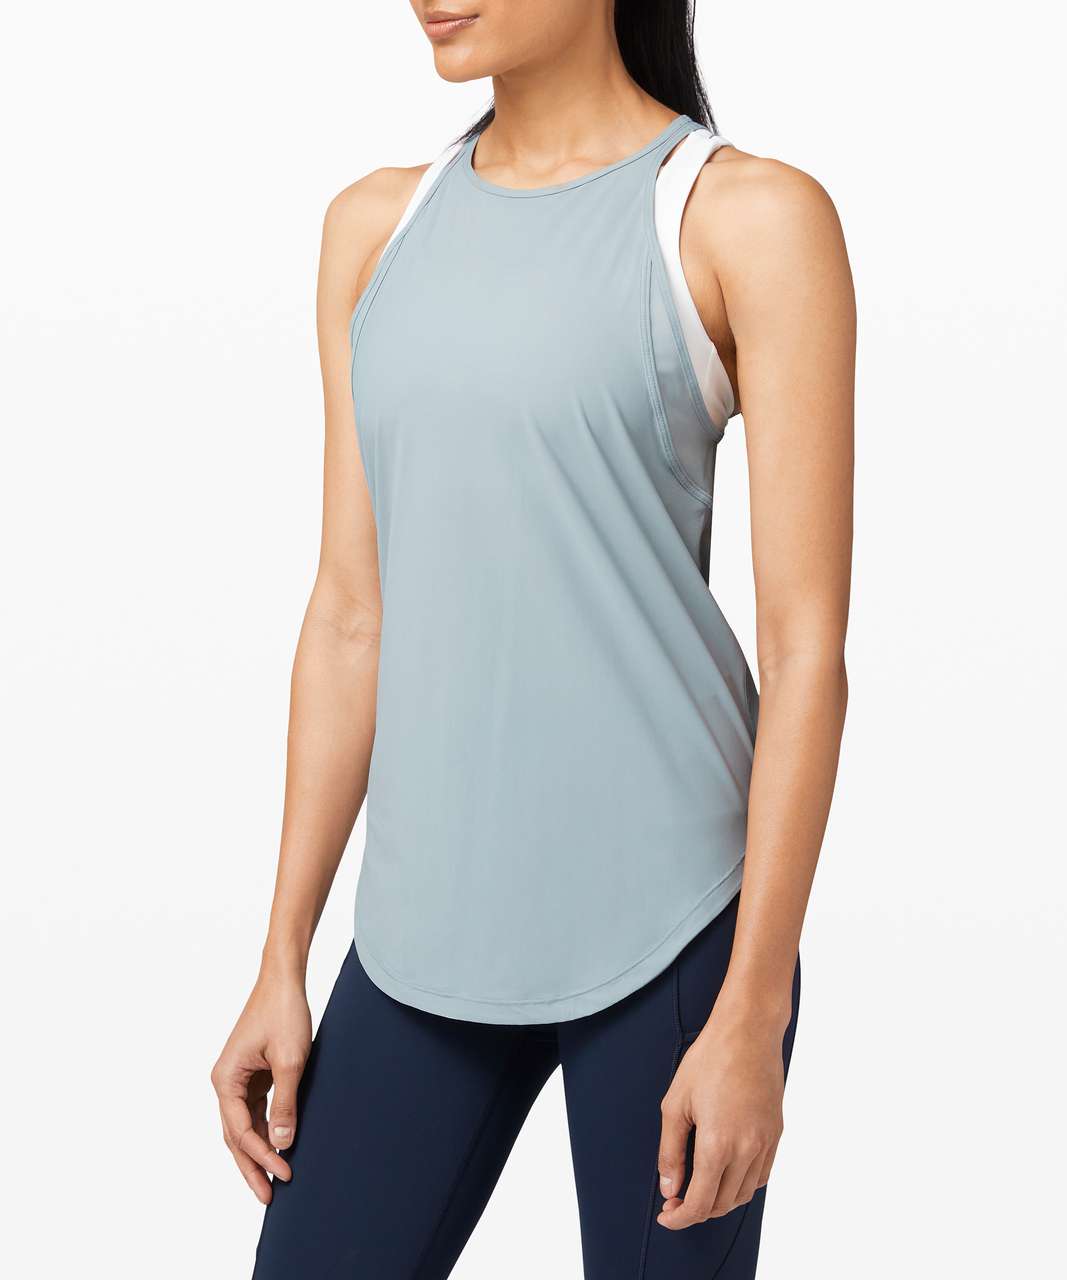 LULULEMON Run Off Route Tank Women’s Tank Top Color Iced Iris Size 6 NEW  w/Tags